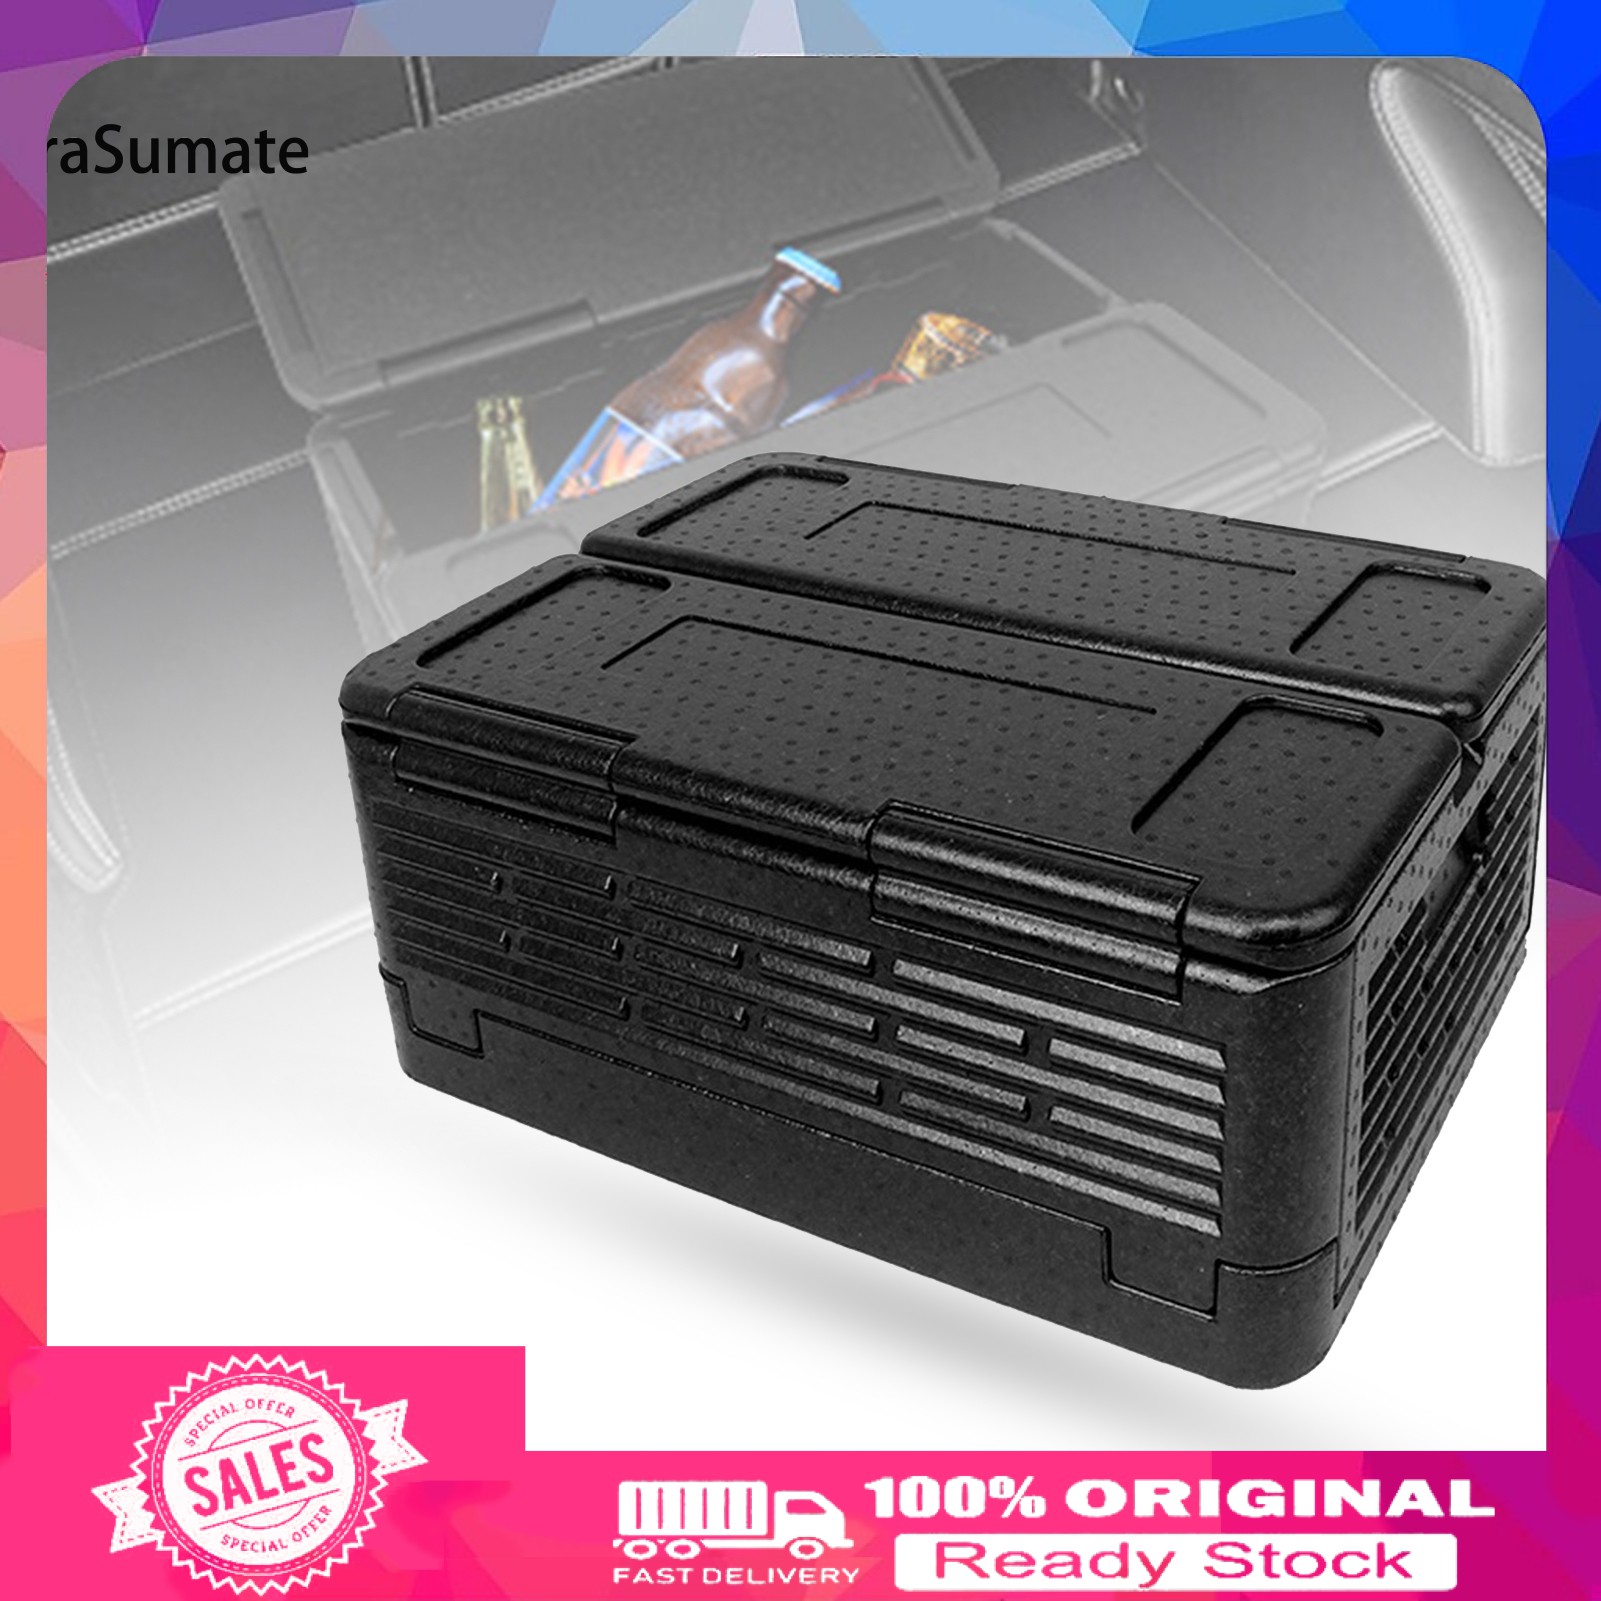 raSumate_my Sports  Travel Cool Appearance Portable Box Portable Lightweight Cool Appearance Car Refrigerator Large Capacity for Outdoor